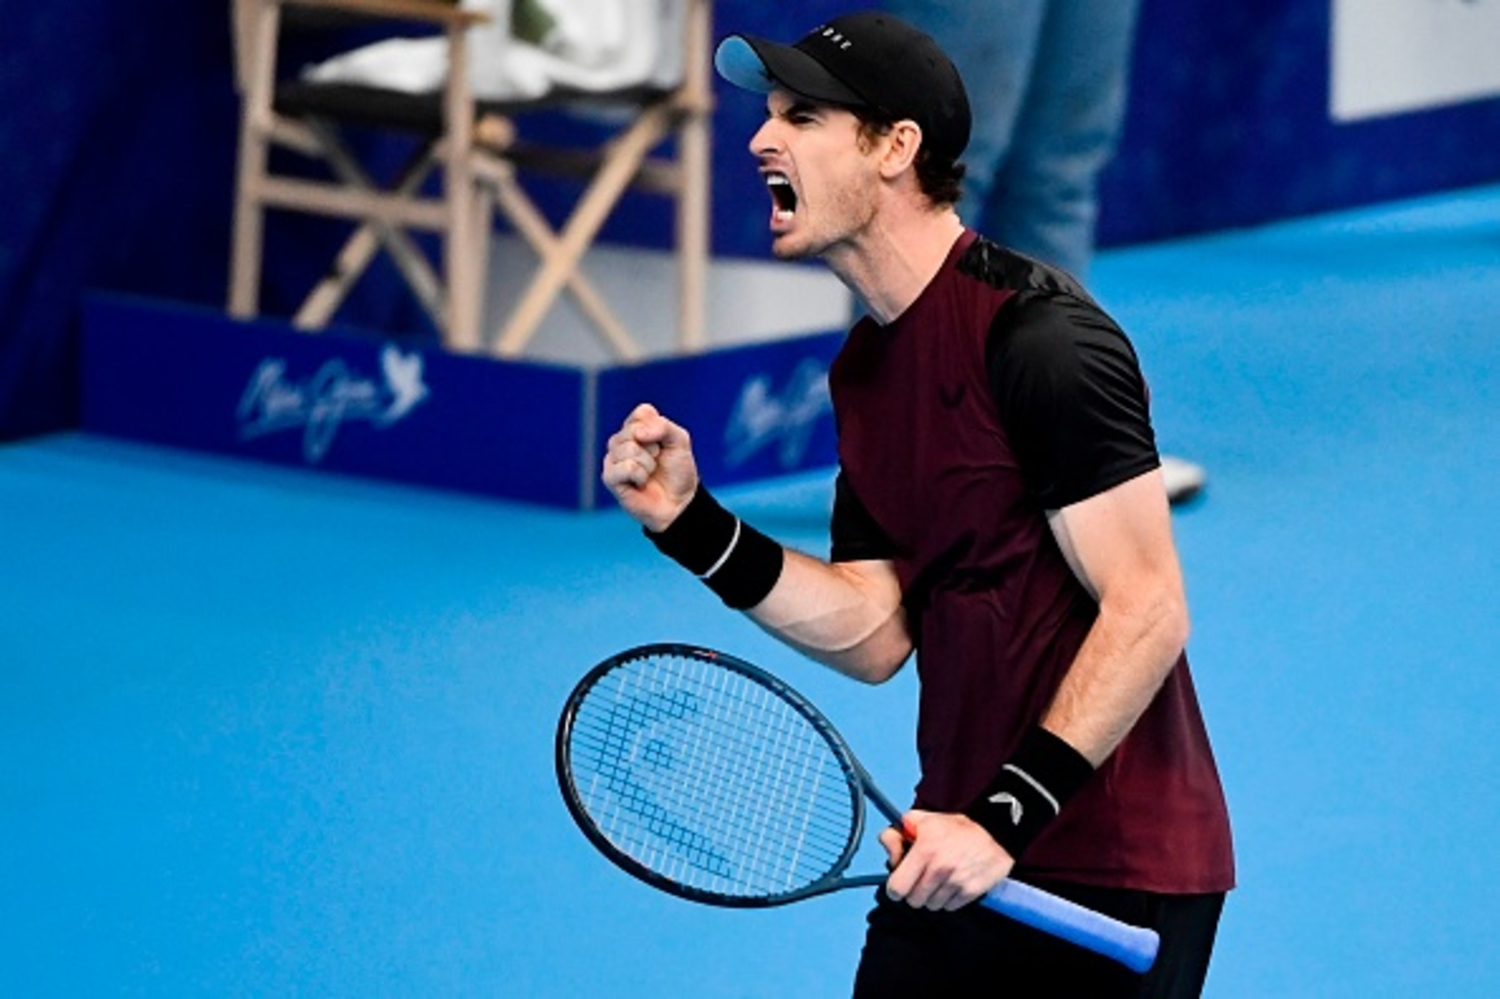 What is Andy Murray’s Net Worth?